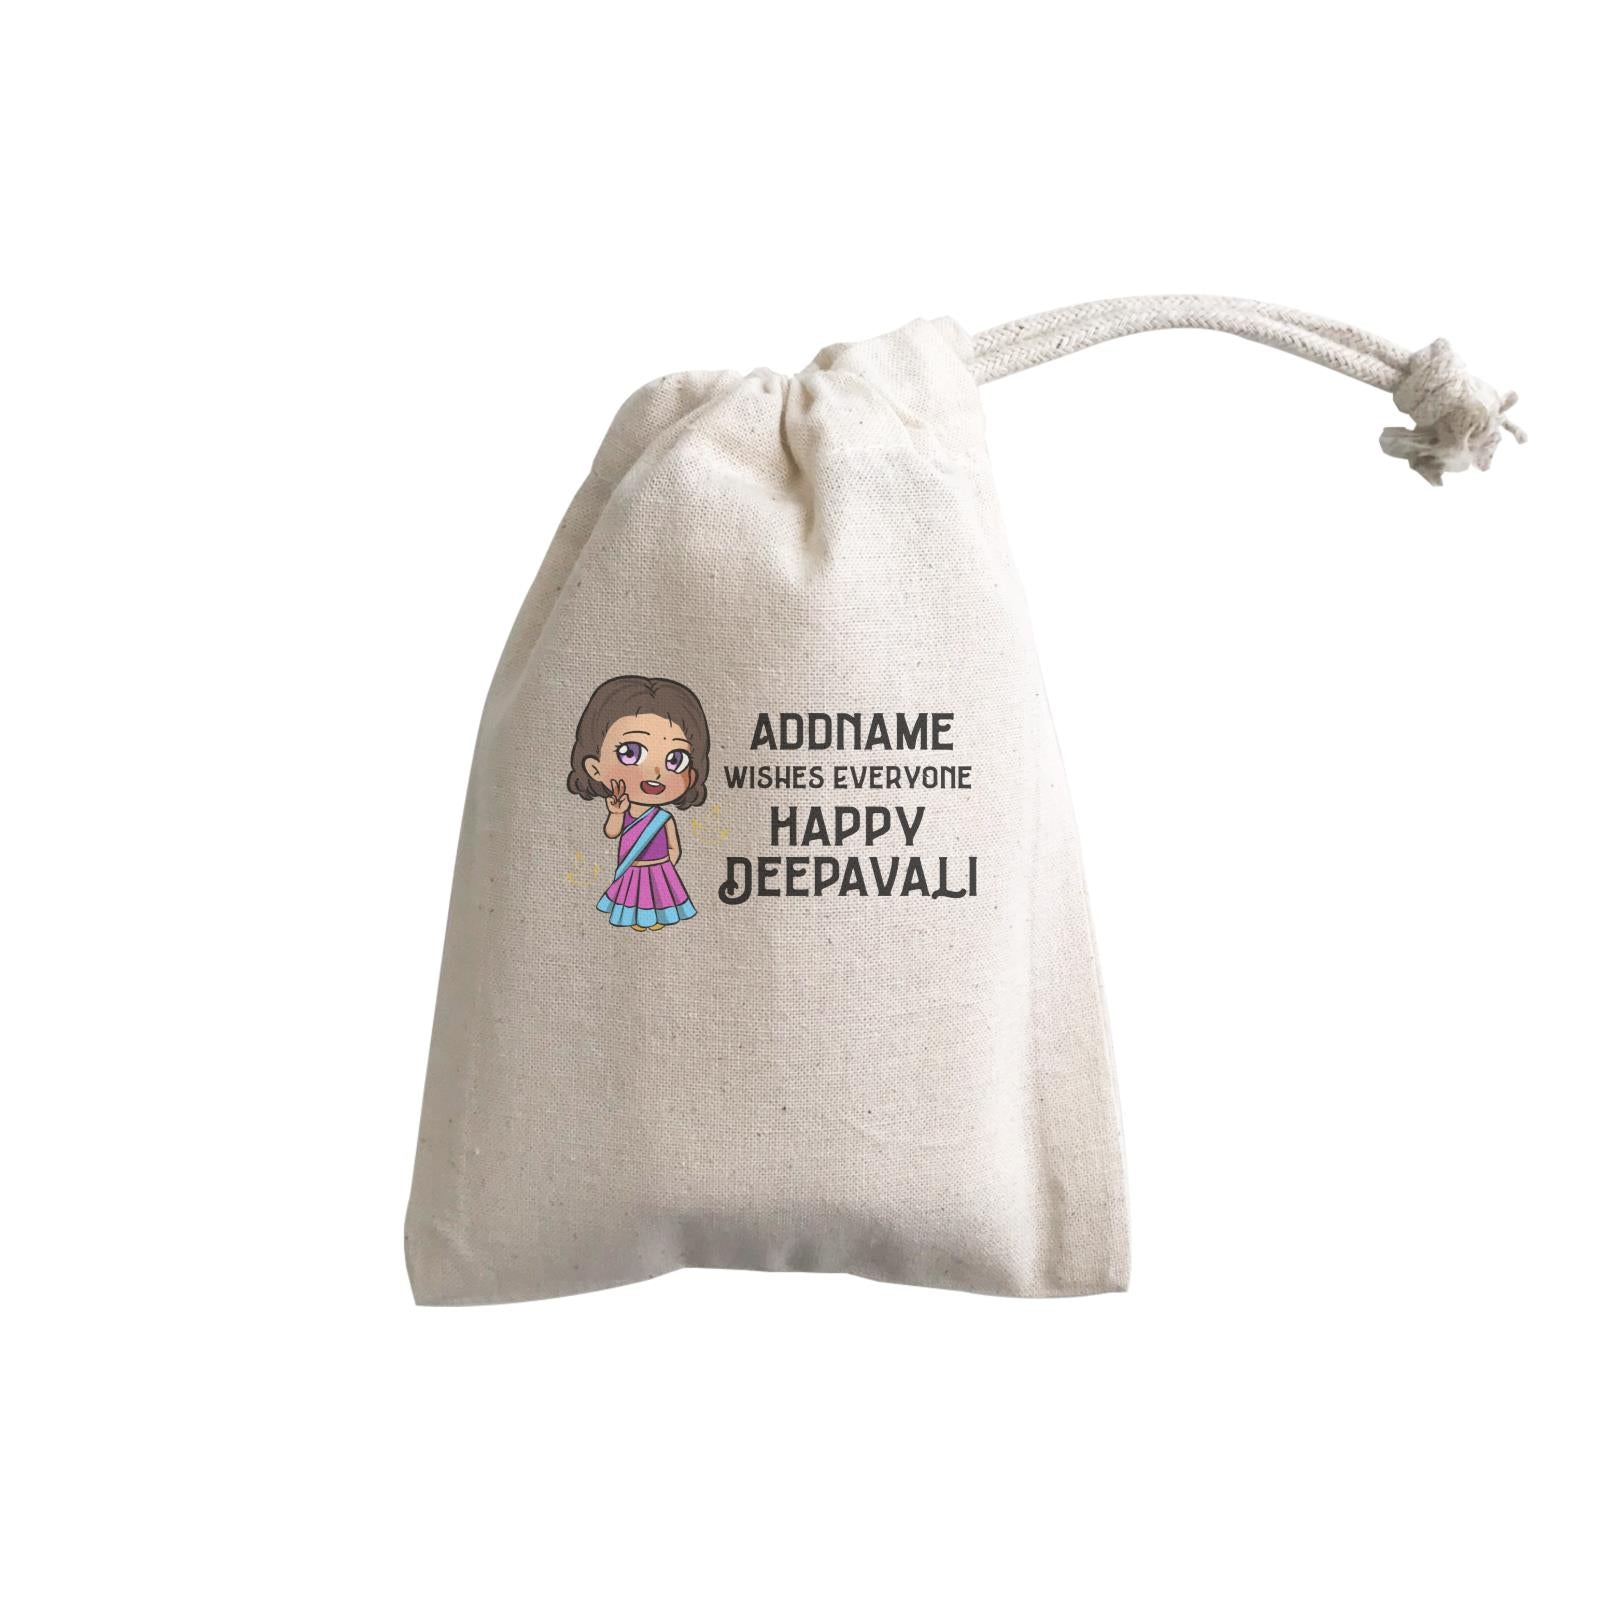 Deepavali Chibi Little Girl Addname Wishes Everyone Deepavali GP Gift Pouch